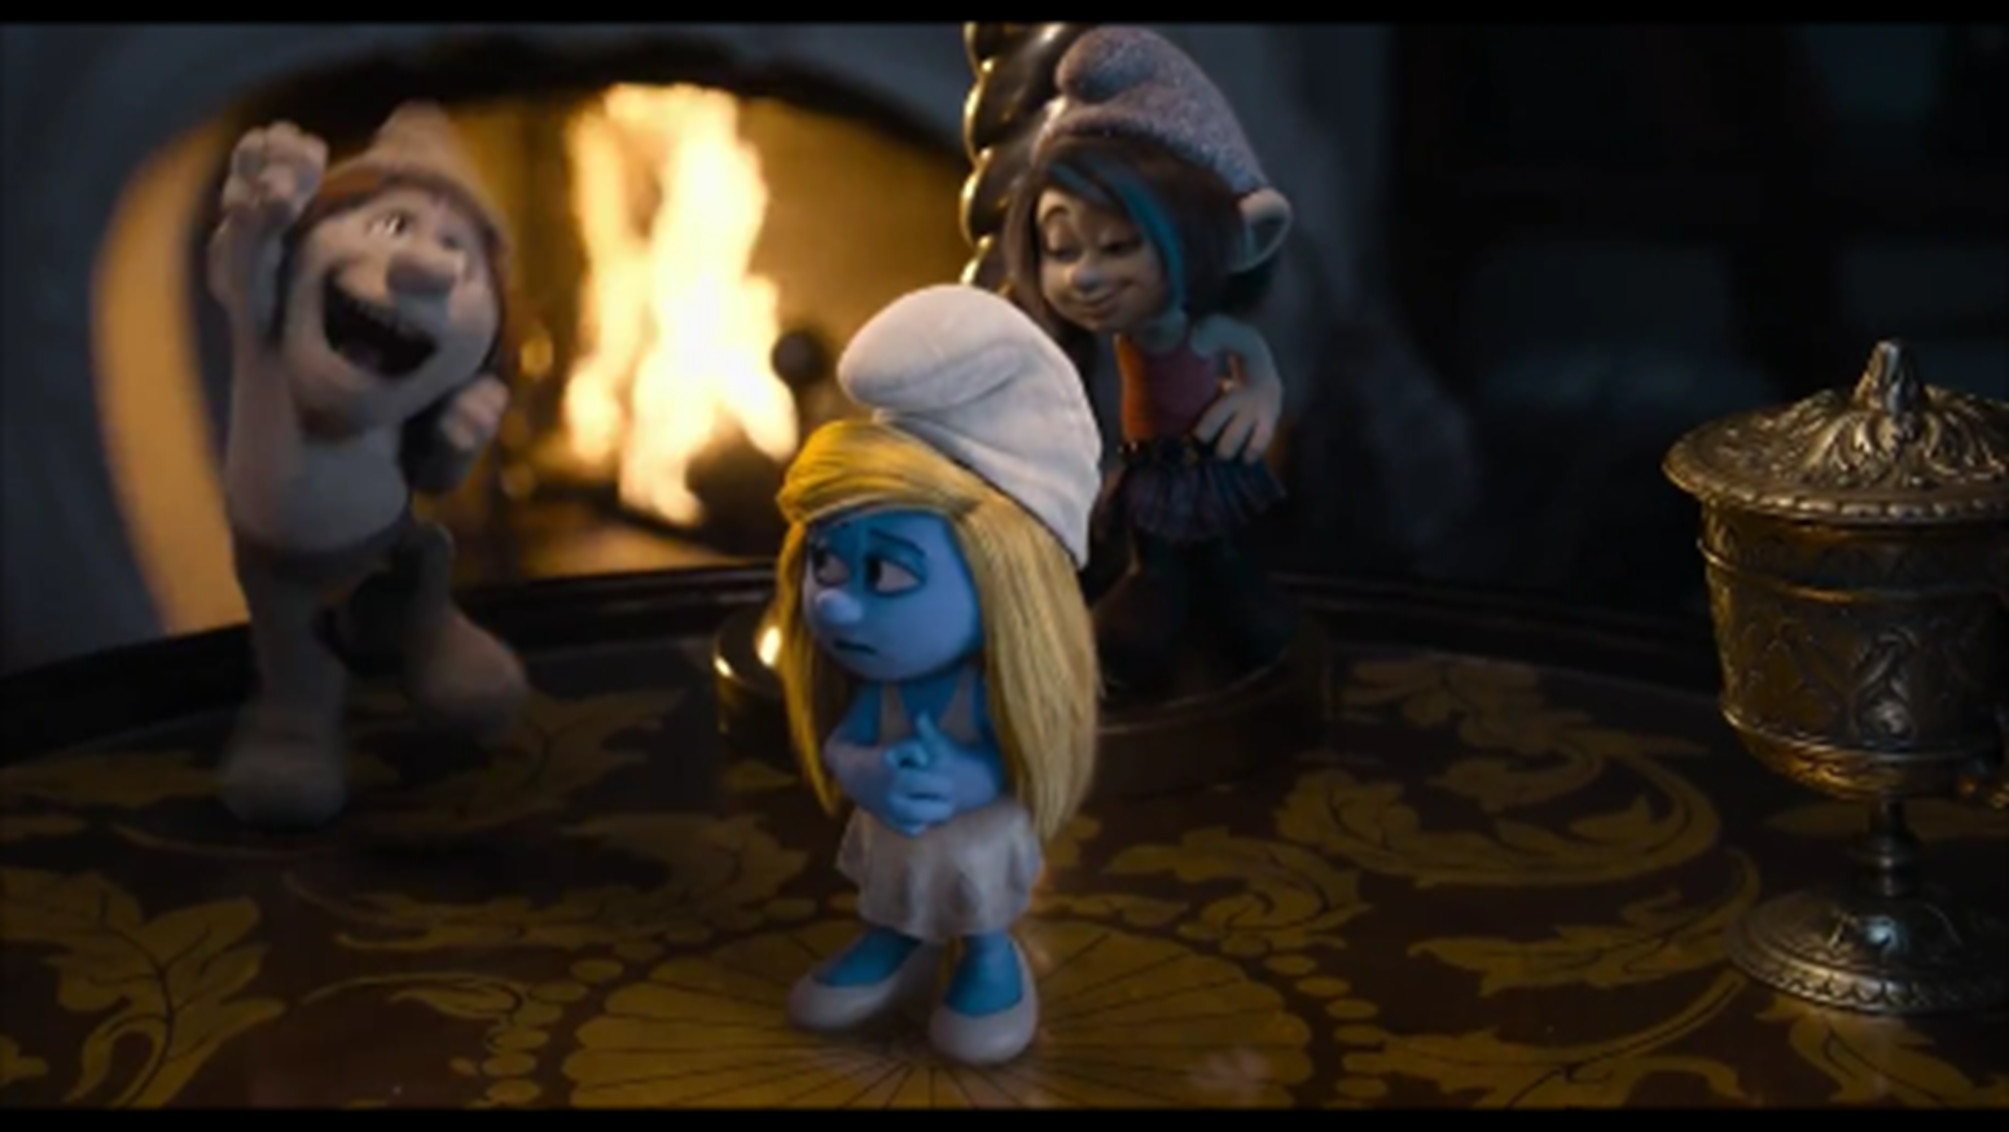 2009x1132 The Smurfs images The Smurfs 2 HD wallpaper and background photos